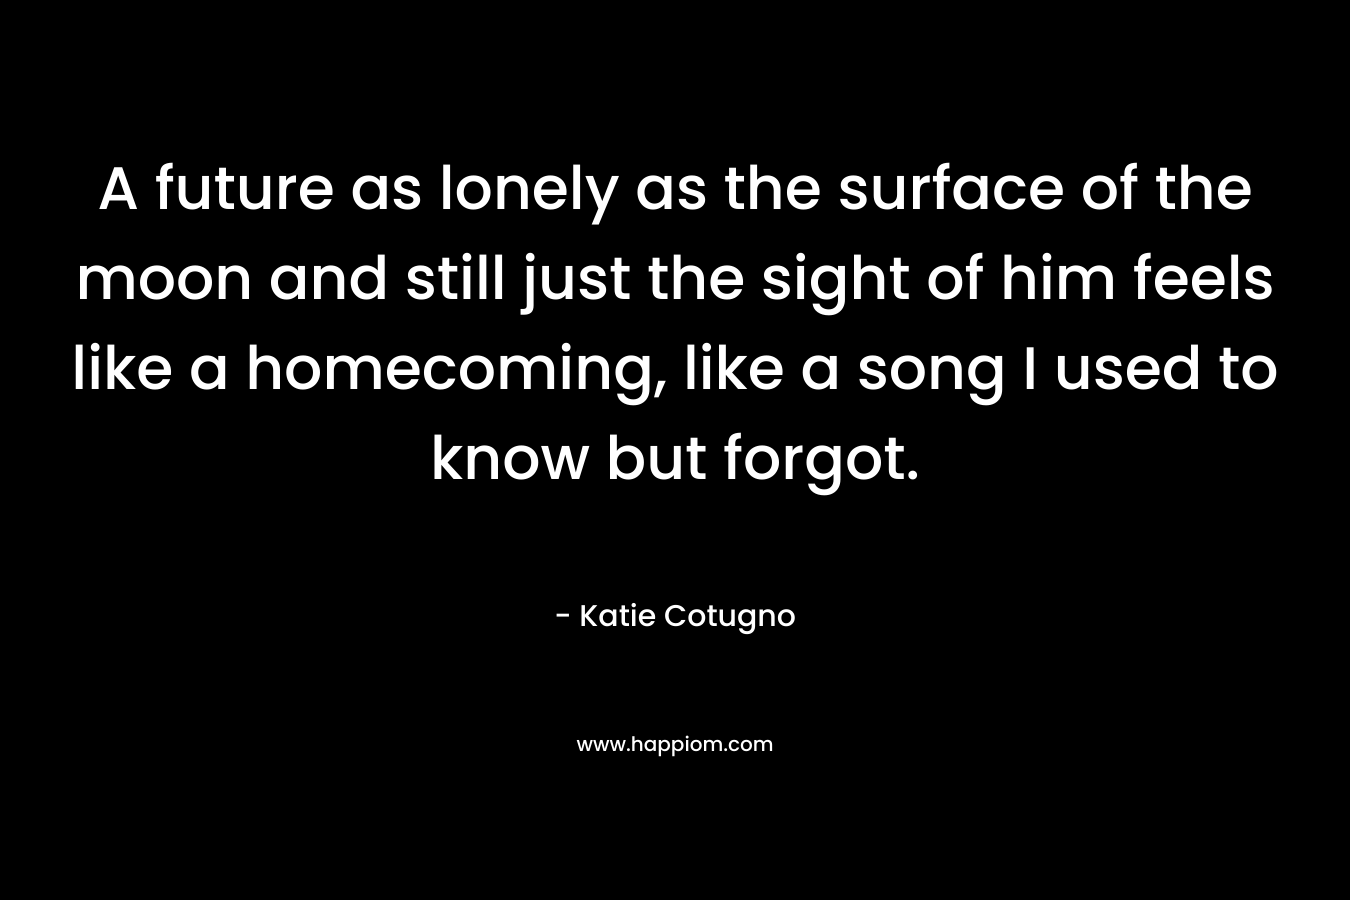 A future as lonely as the surface of the moon and still just the sight of him feels like a homecoming, like a song I used to know but forgot. – Katie Cotugno